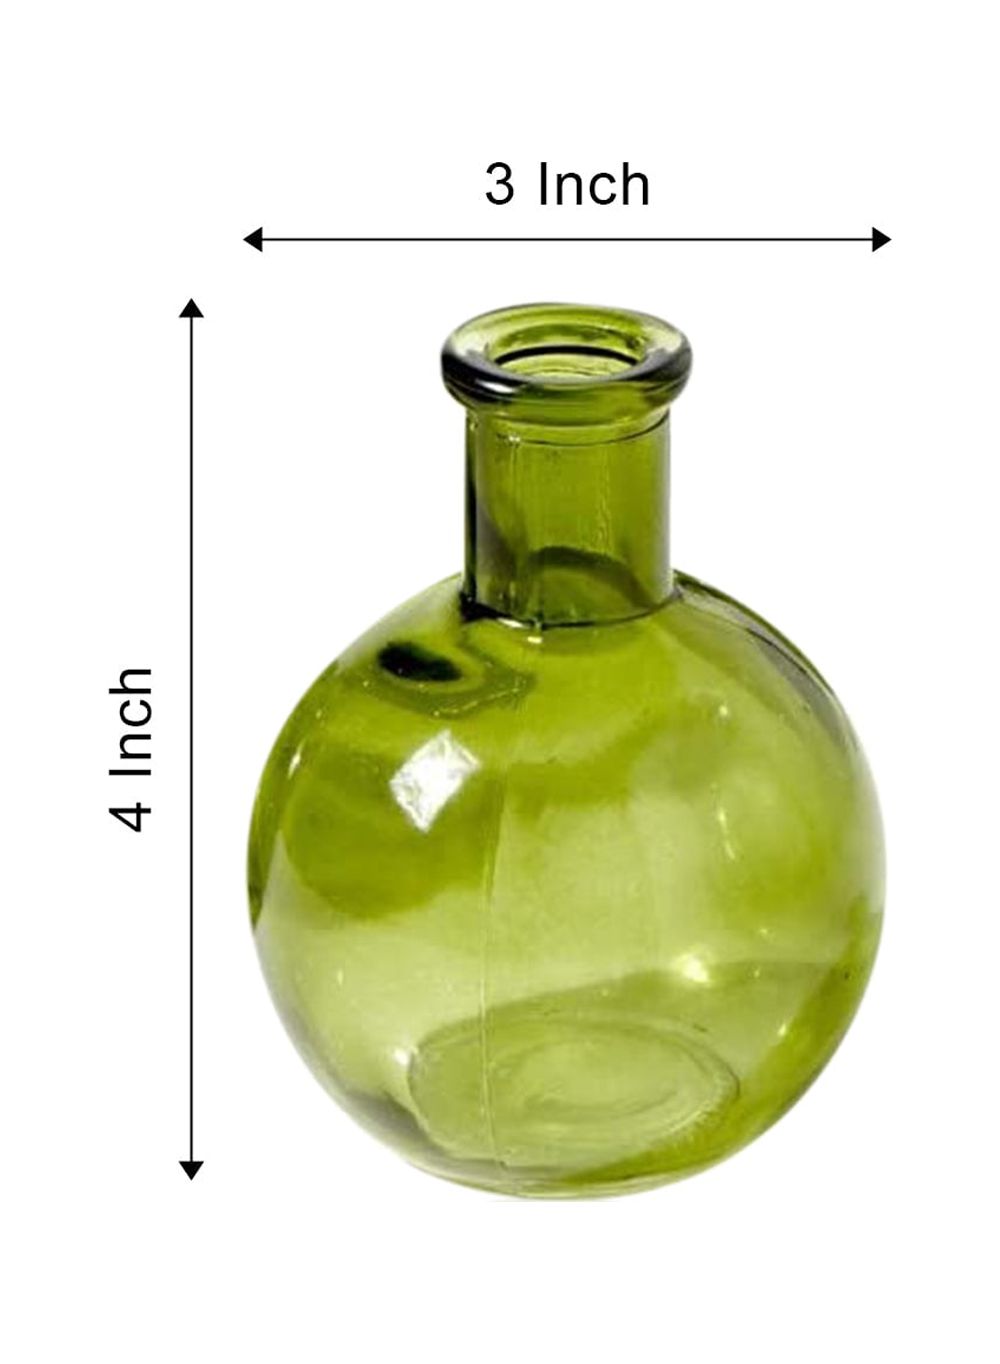 Serene Spaces Living Set of 6 Small Green Ball Bud Vases, Measures 4" Tall - image 4 of 4